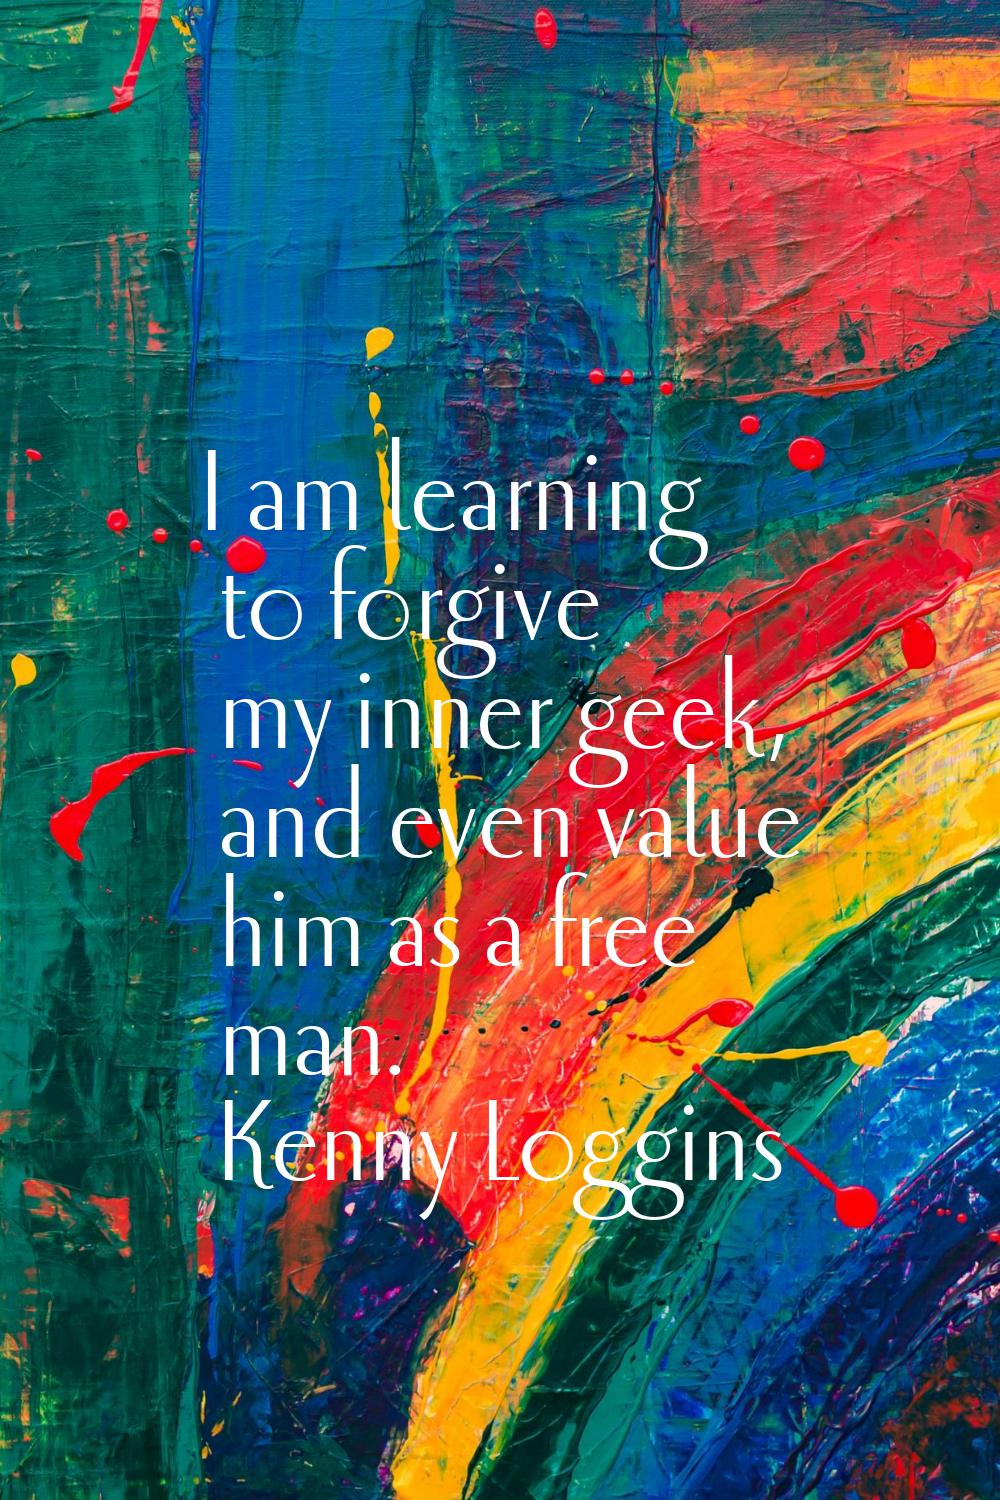 I am learning to forgive my inner geek, and even value him as a free man.